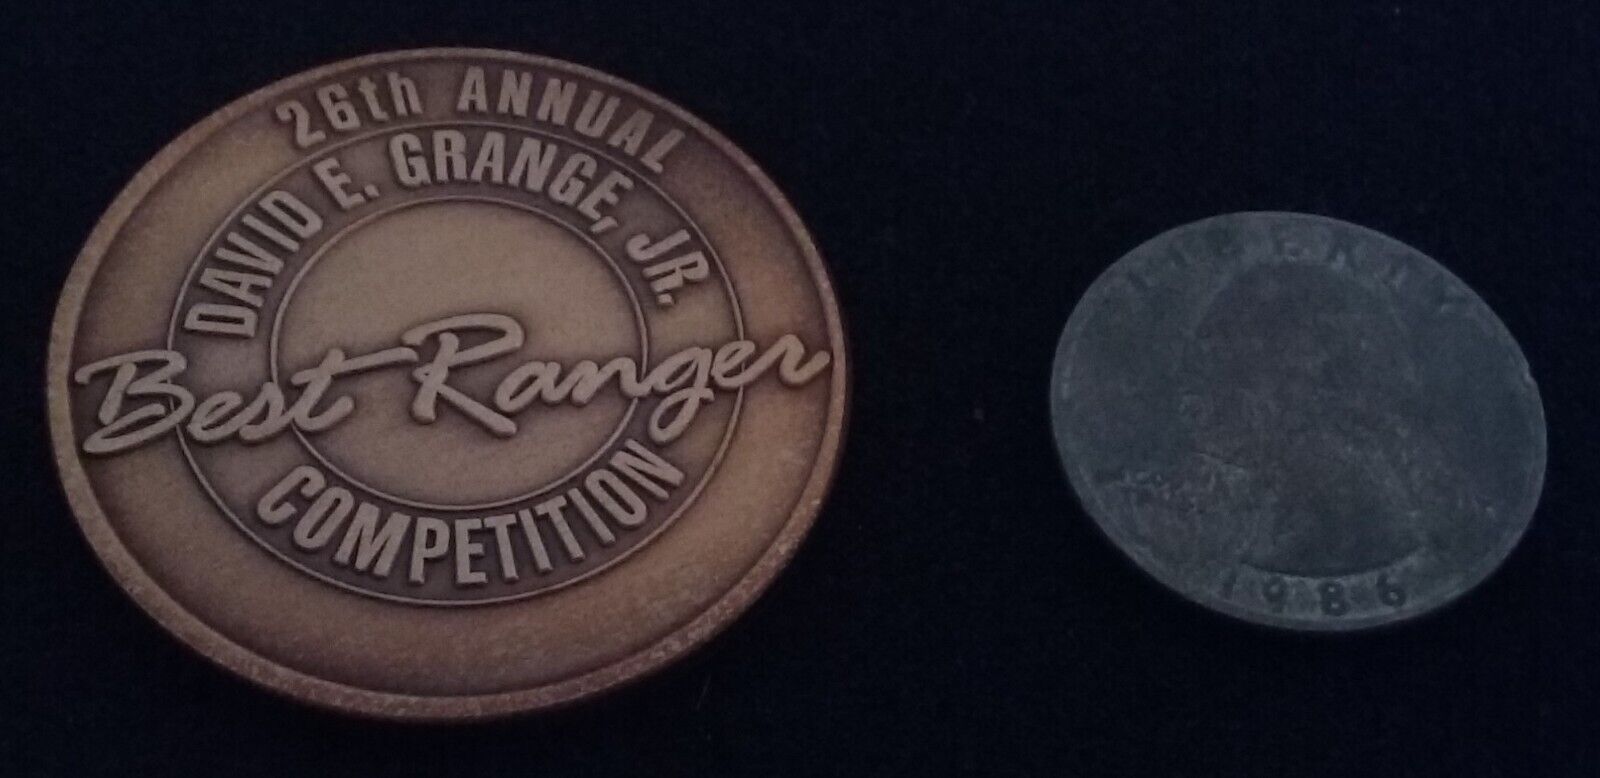 RARE 26th Annual Best Ranger Competition Special Forces SOCOM Challenge Coin